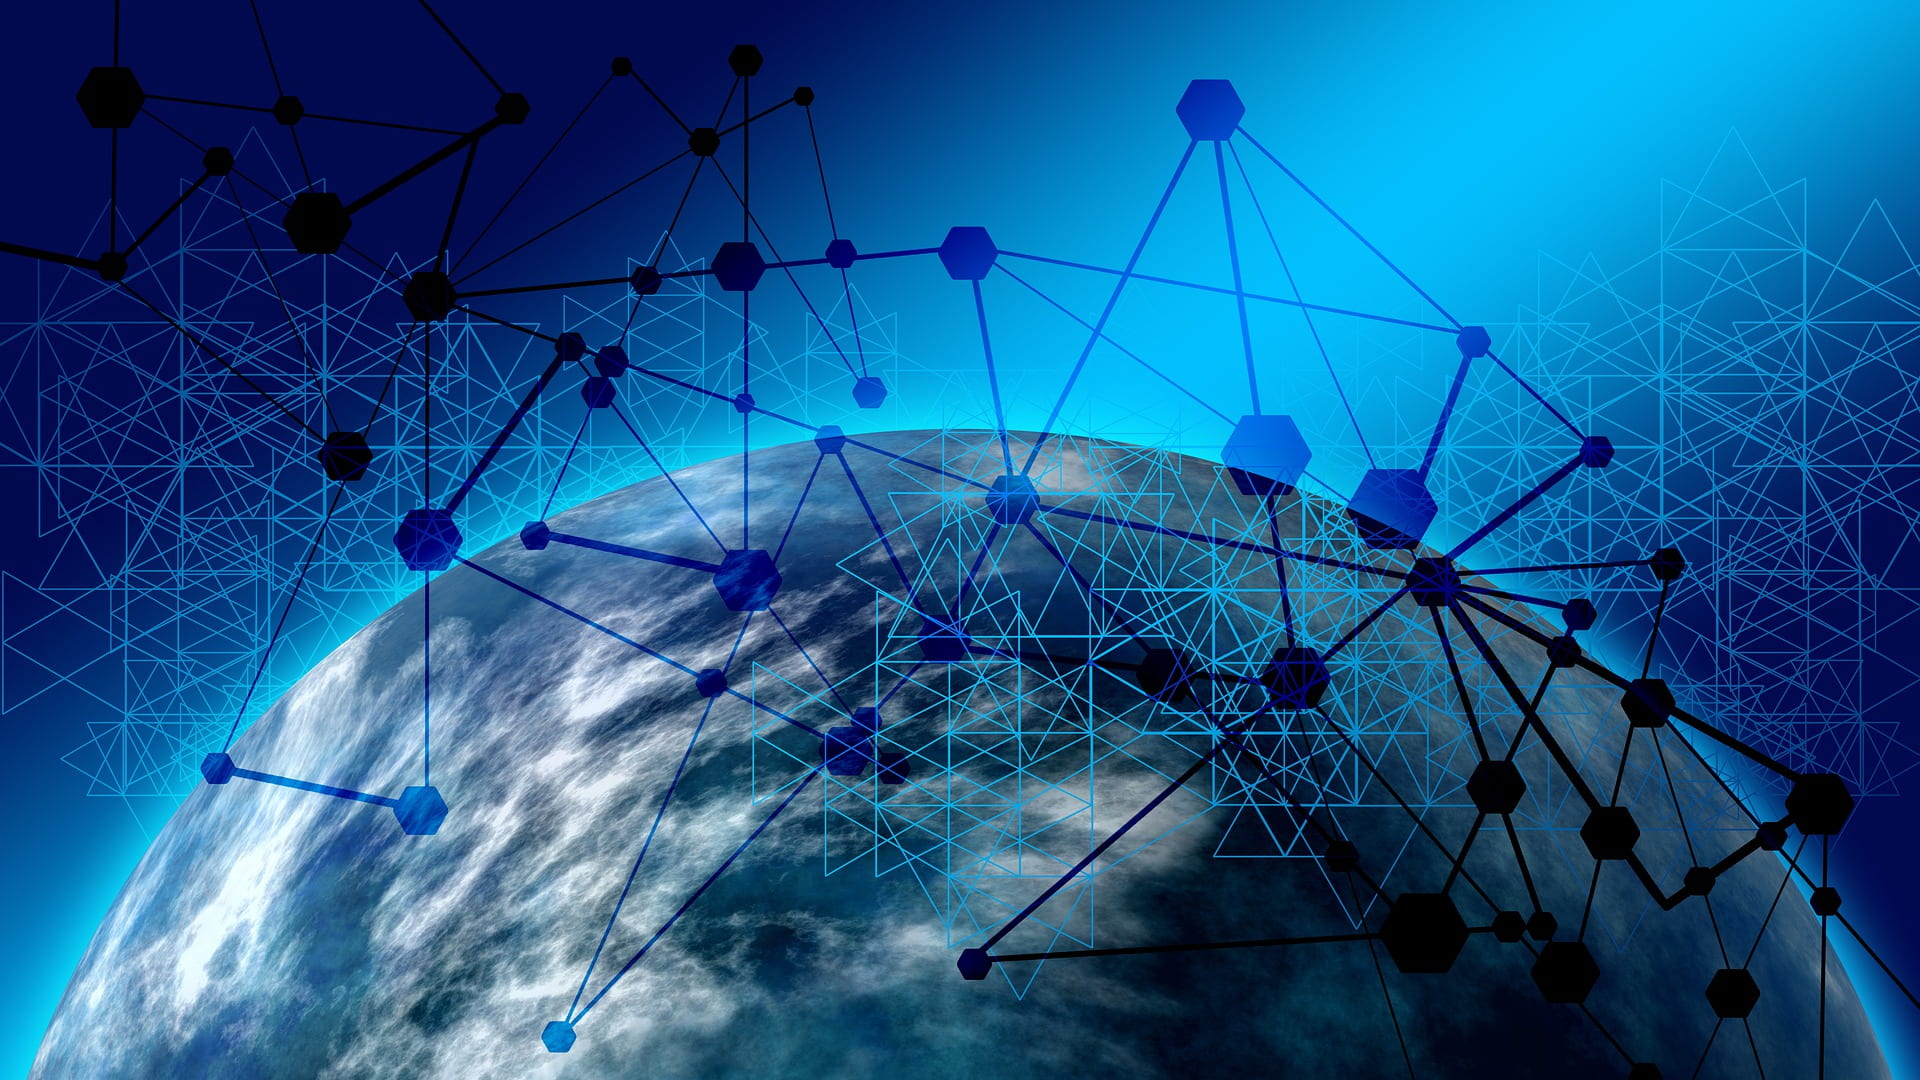 Image of a globe surrounded by a network